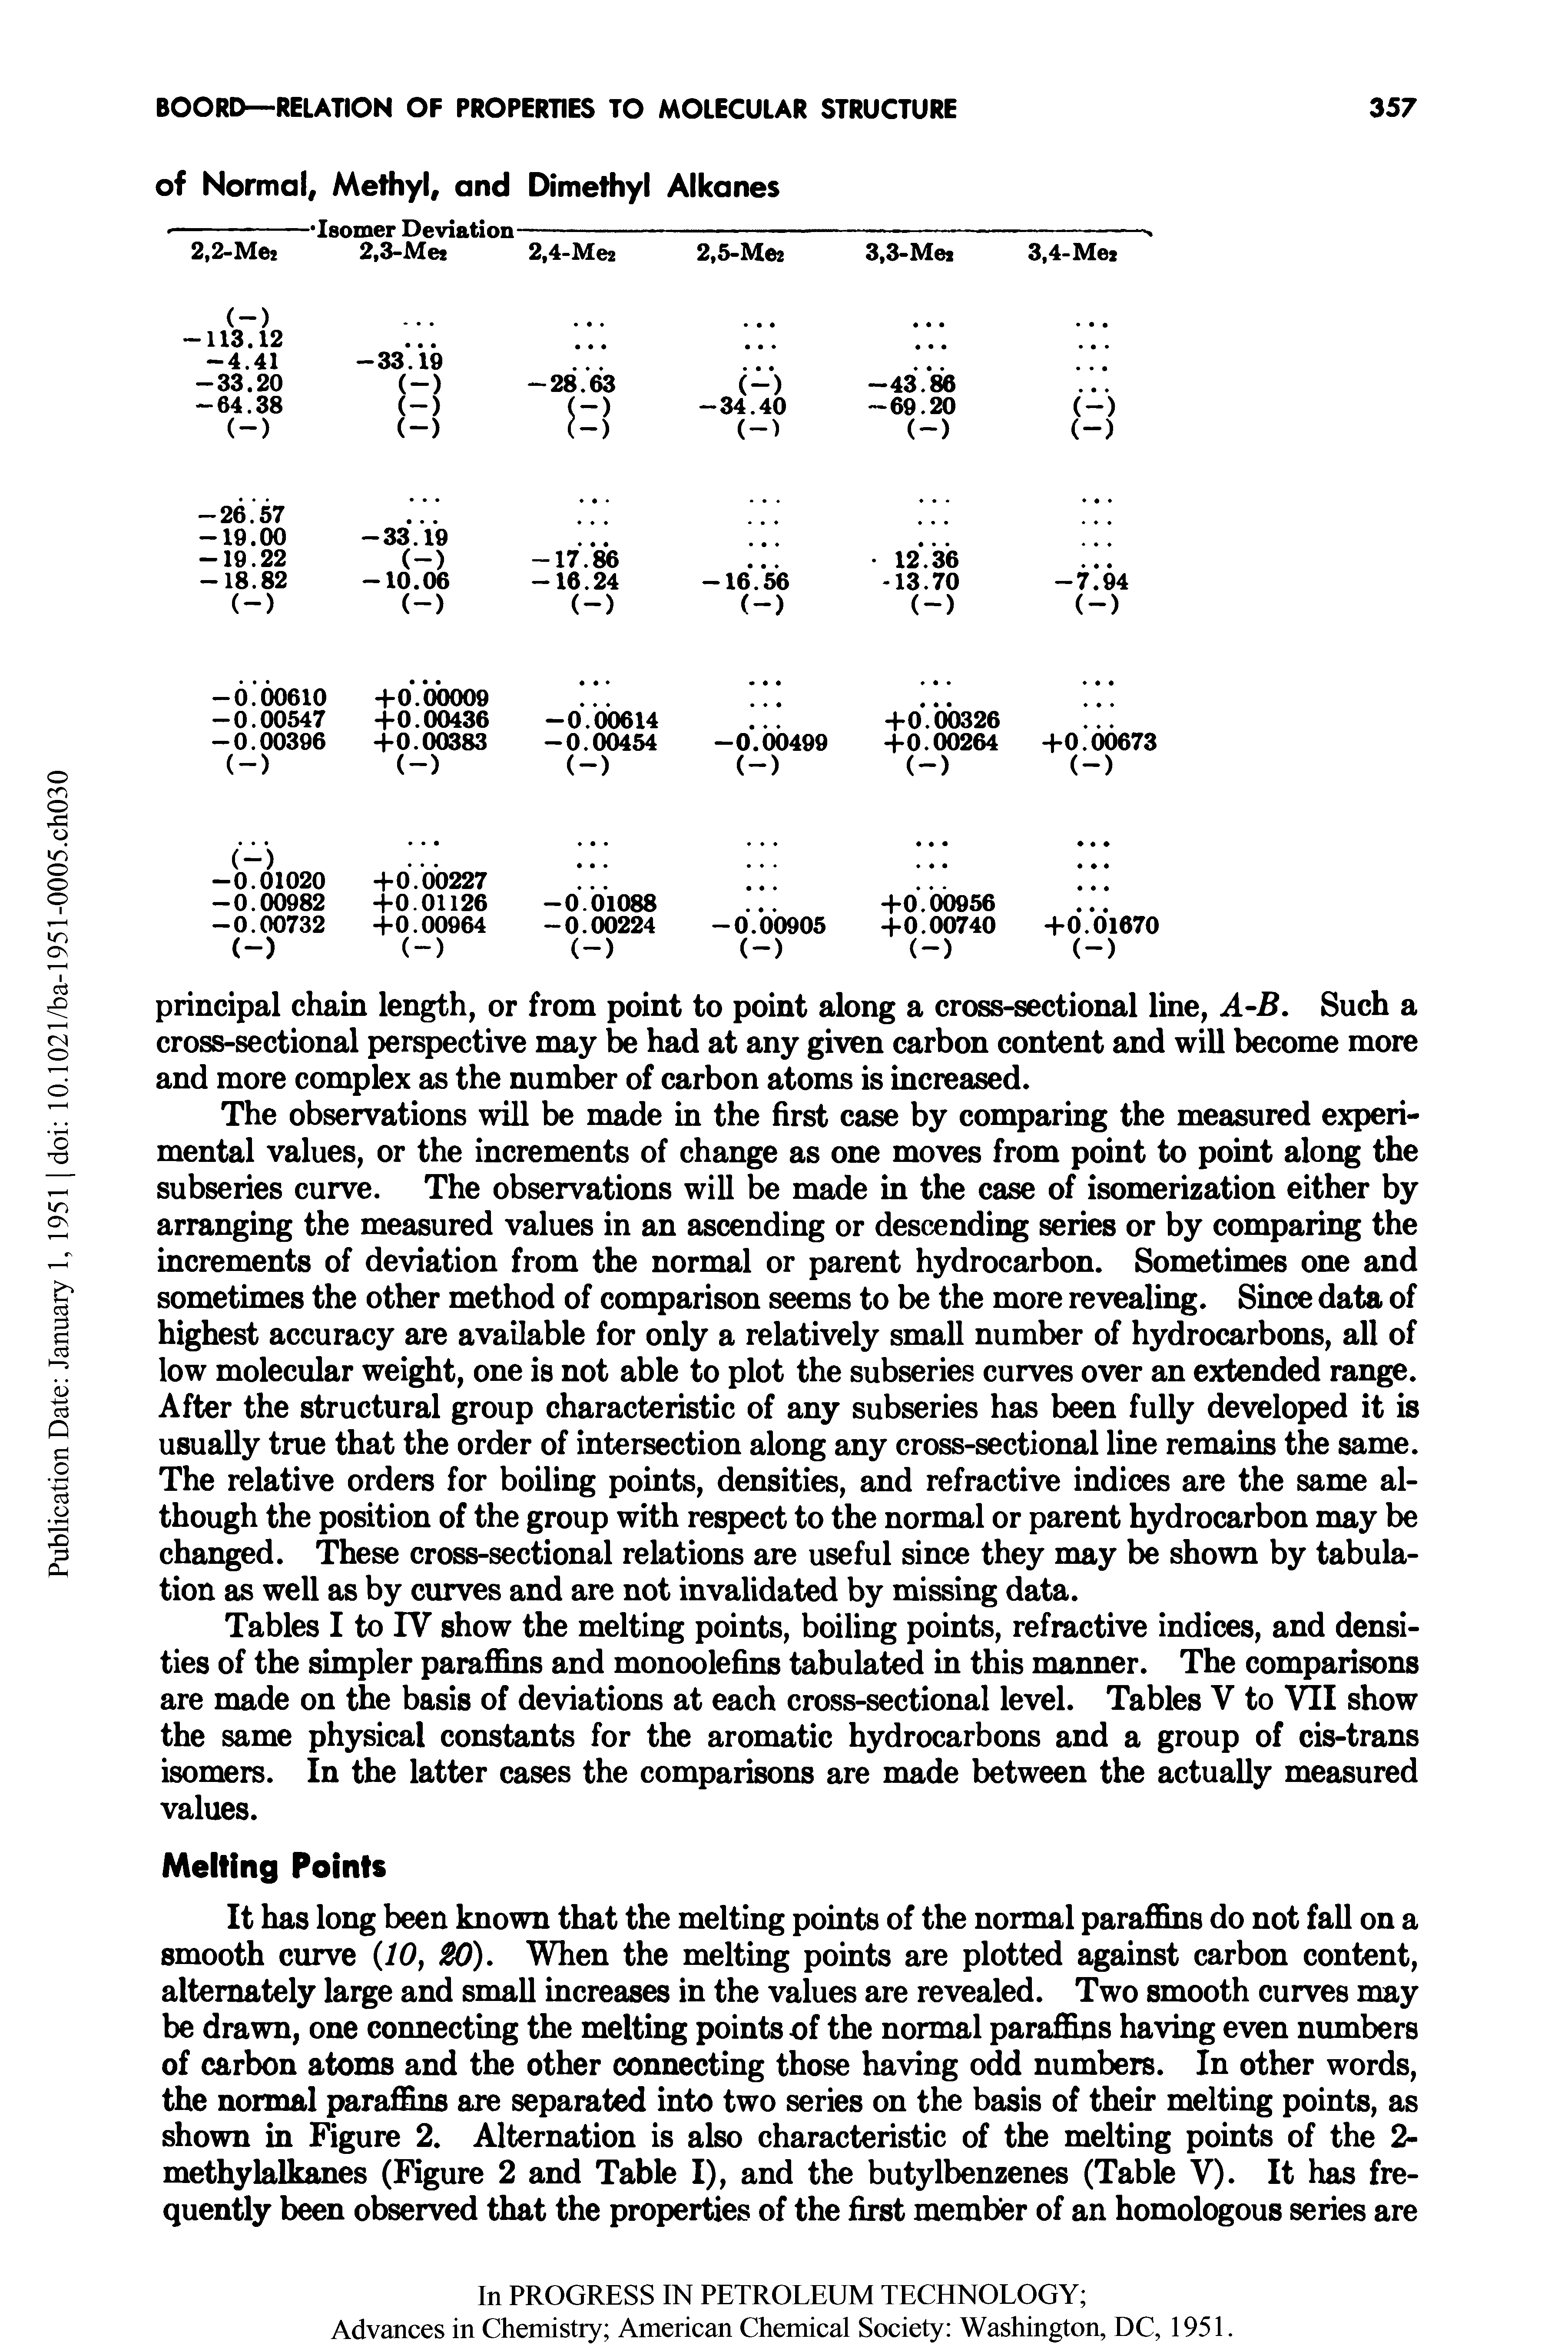 Tables I to IV show the melting points, boiling points, refractive indices, and densities of the simpler paraffins and monoolefins tabulated in this manner. The comparisons are made on the basis of deviations at each cross-sectional level. Tables V to VII show the same physical constants for the aromatic hydrocarbons and a group of cis-trans isomers. In the latter cases the comparisons are made between the actually measured values.